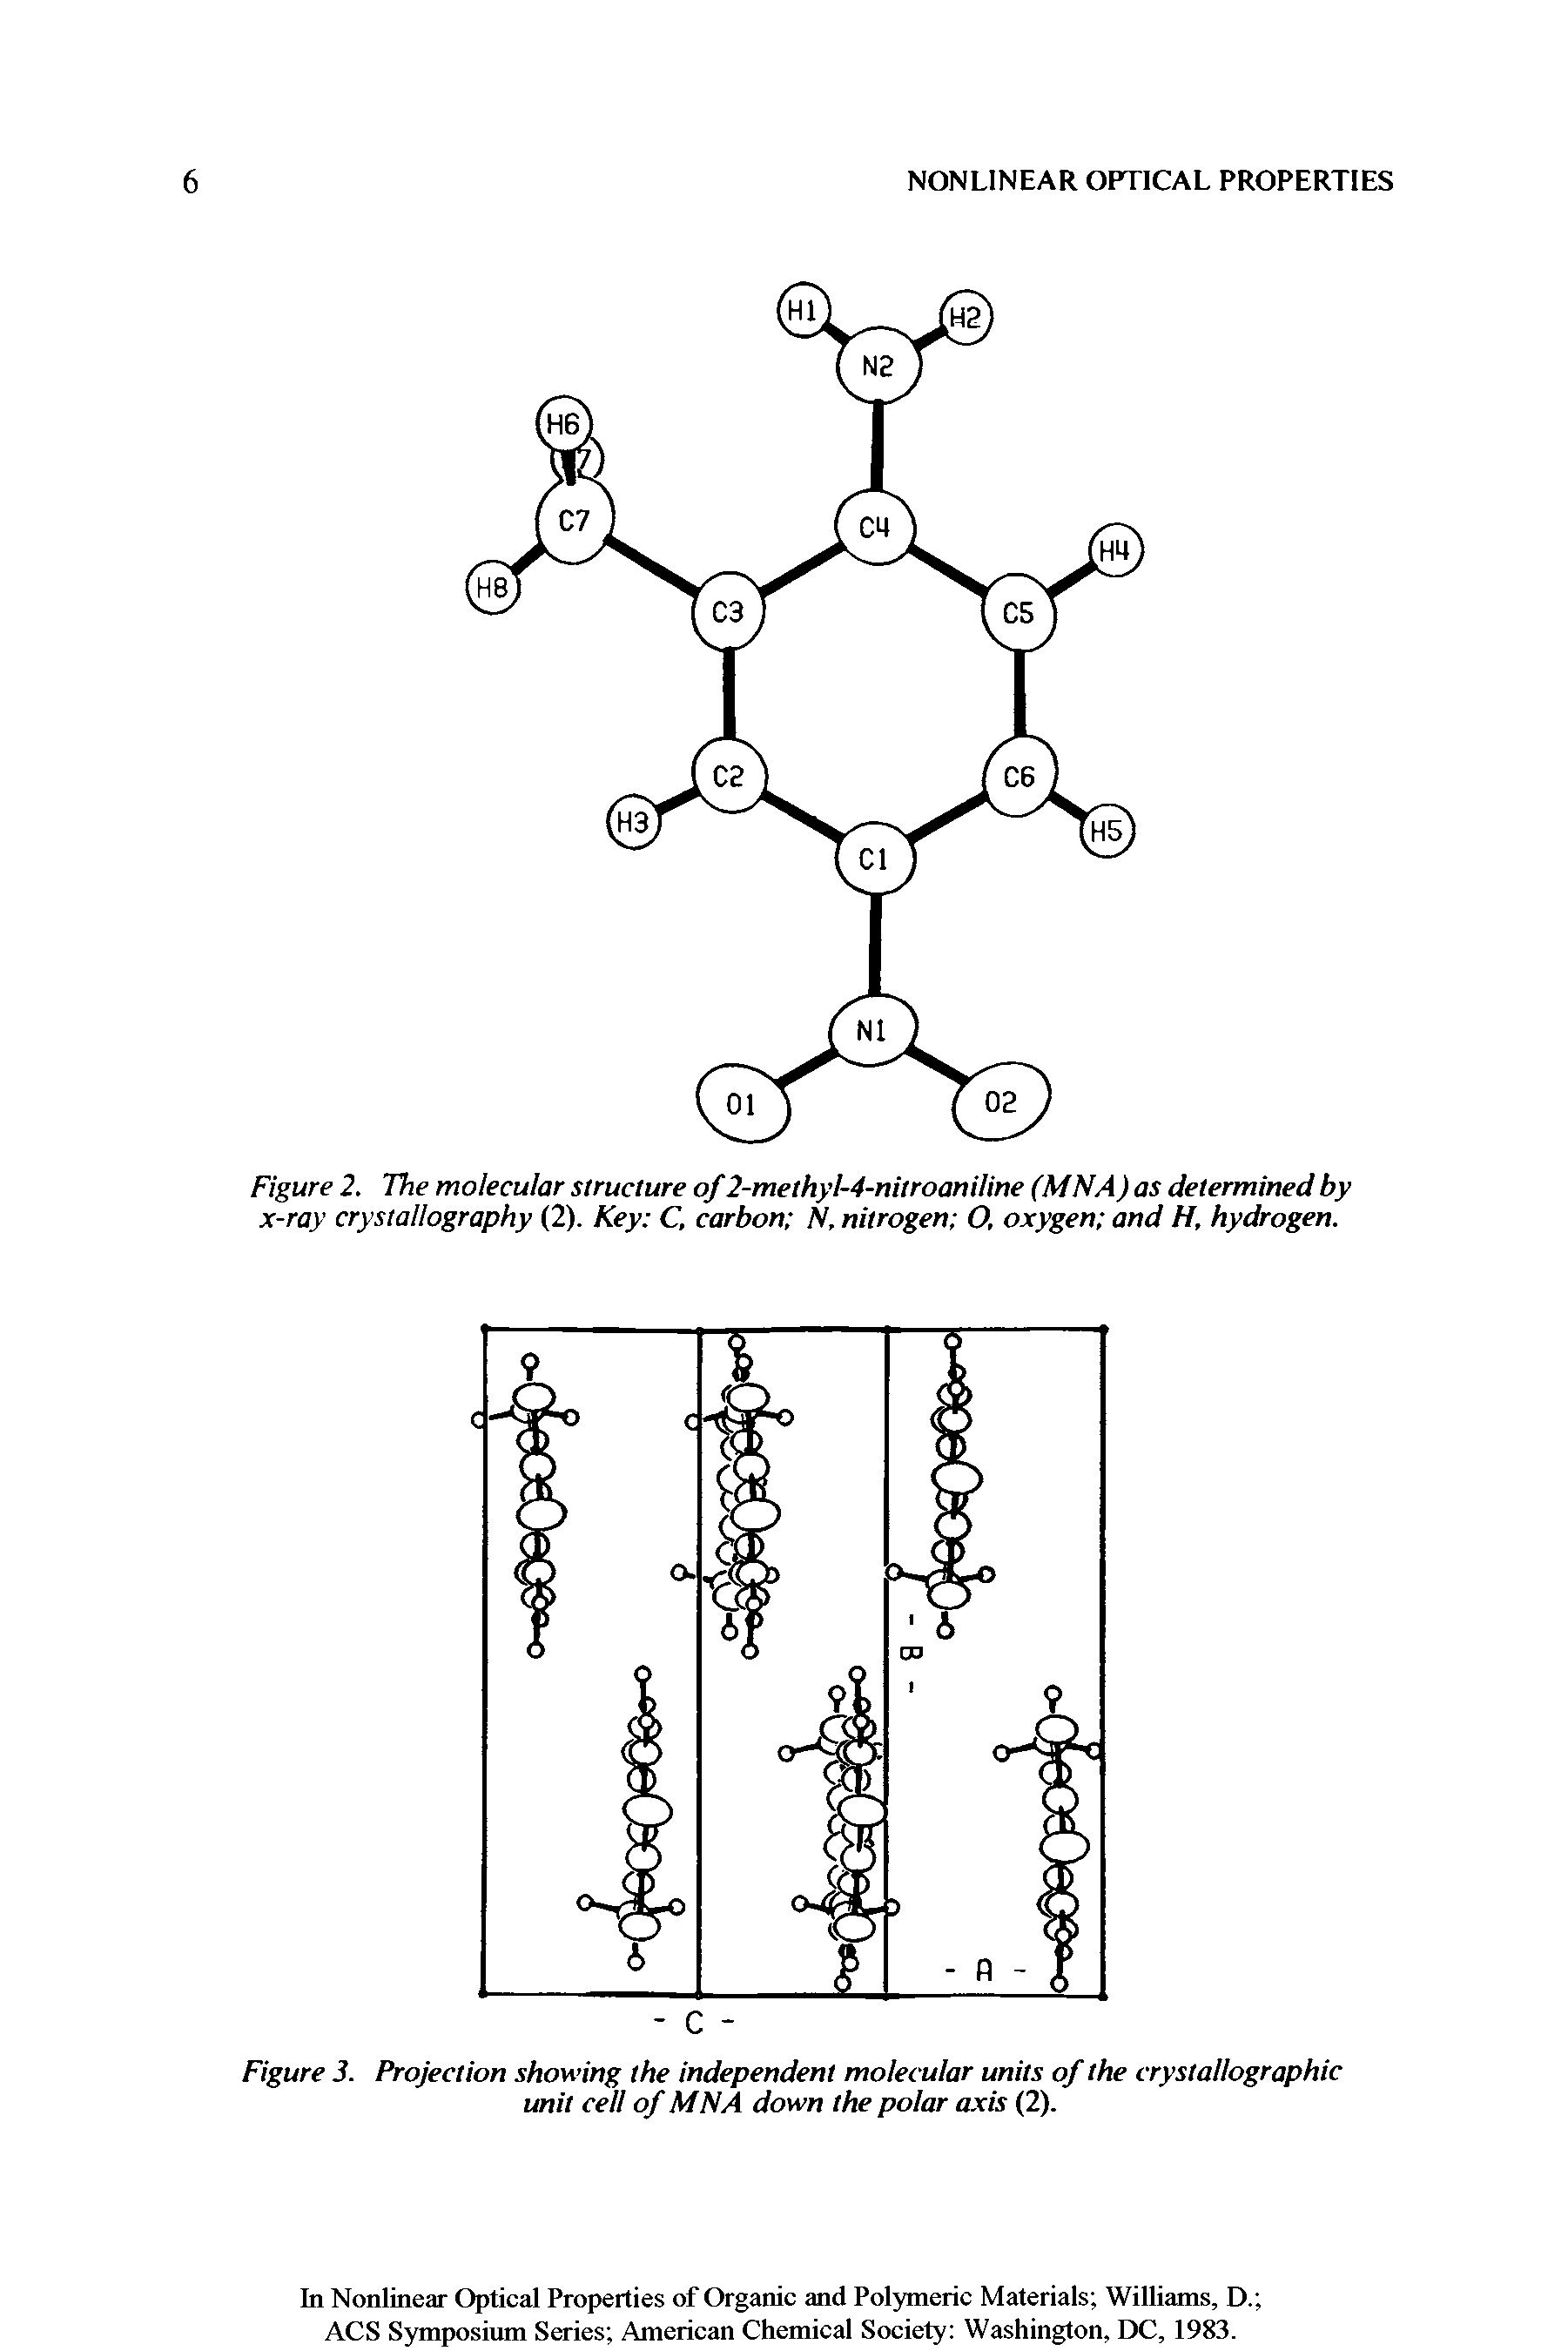 Figure 2. The molecular structure of 2-methyl-4-nitroaniline (MNA) as determined by x-ray crystallography (2). Key C, carbon N, nitrogen O, oxygen and H, hydrogen.